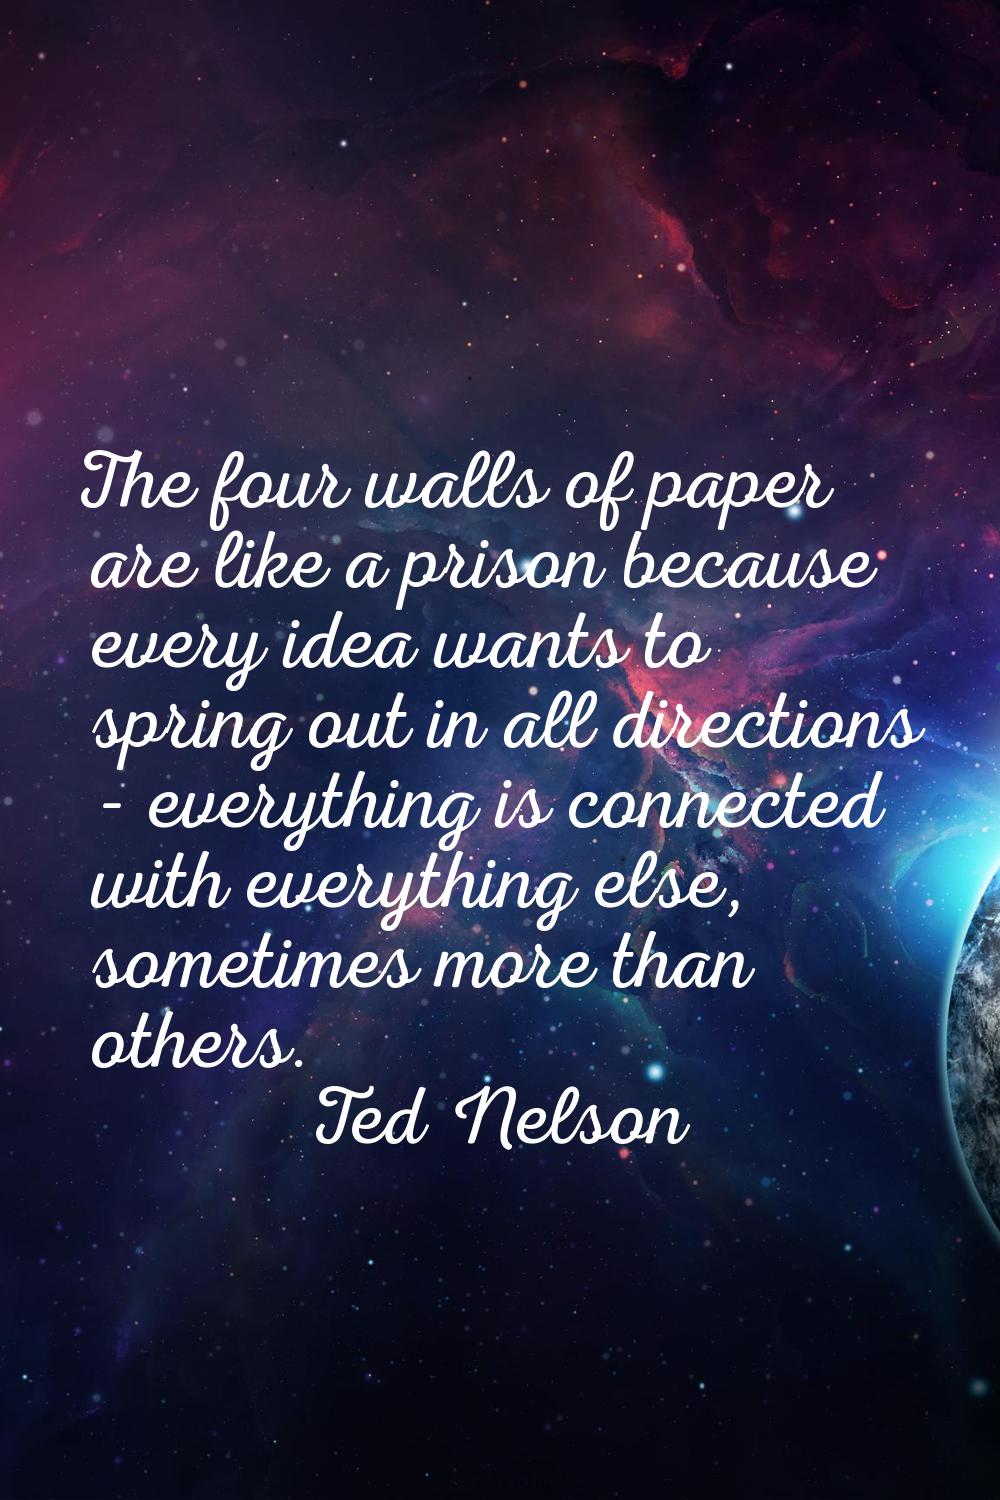 The four walls of paper are like a prison because every idea wants to spring out in all directions 